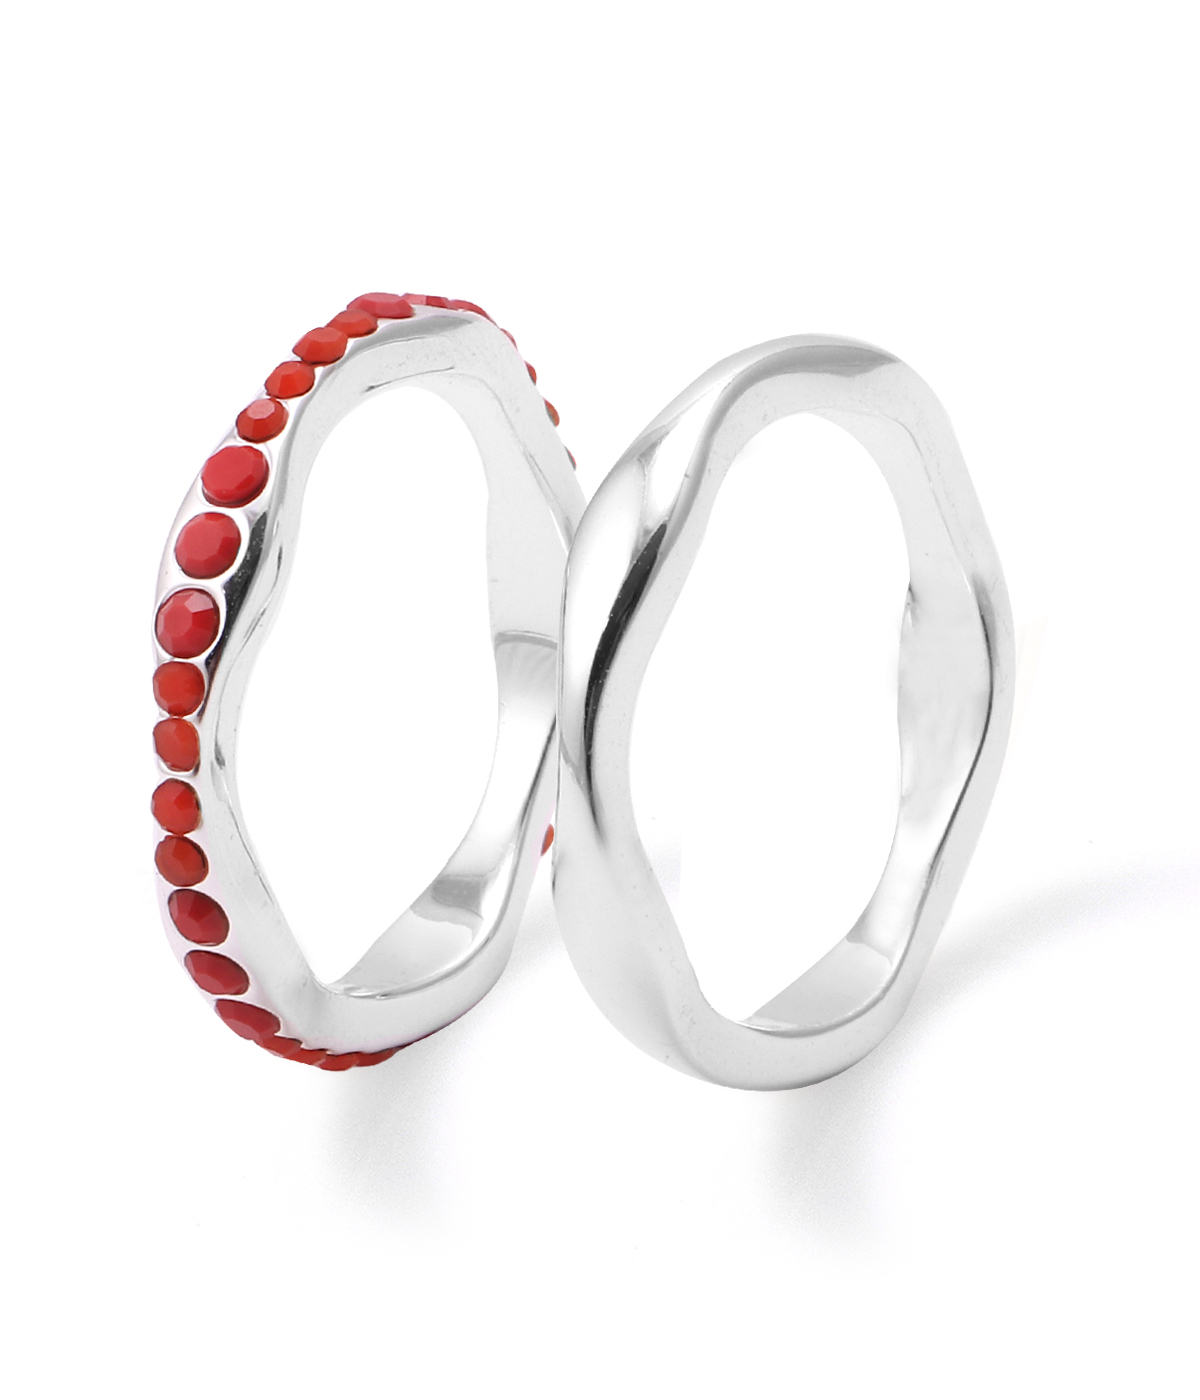 FLOW-Red-New mould -latest RING,Band Ring design 2021